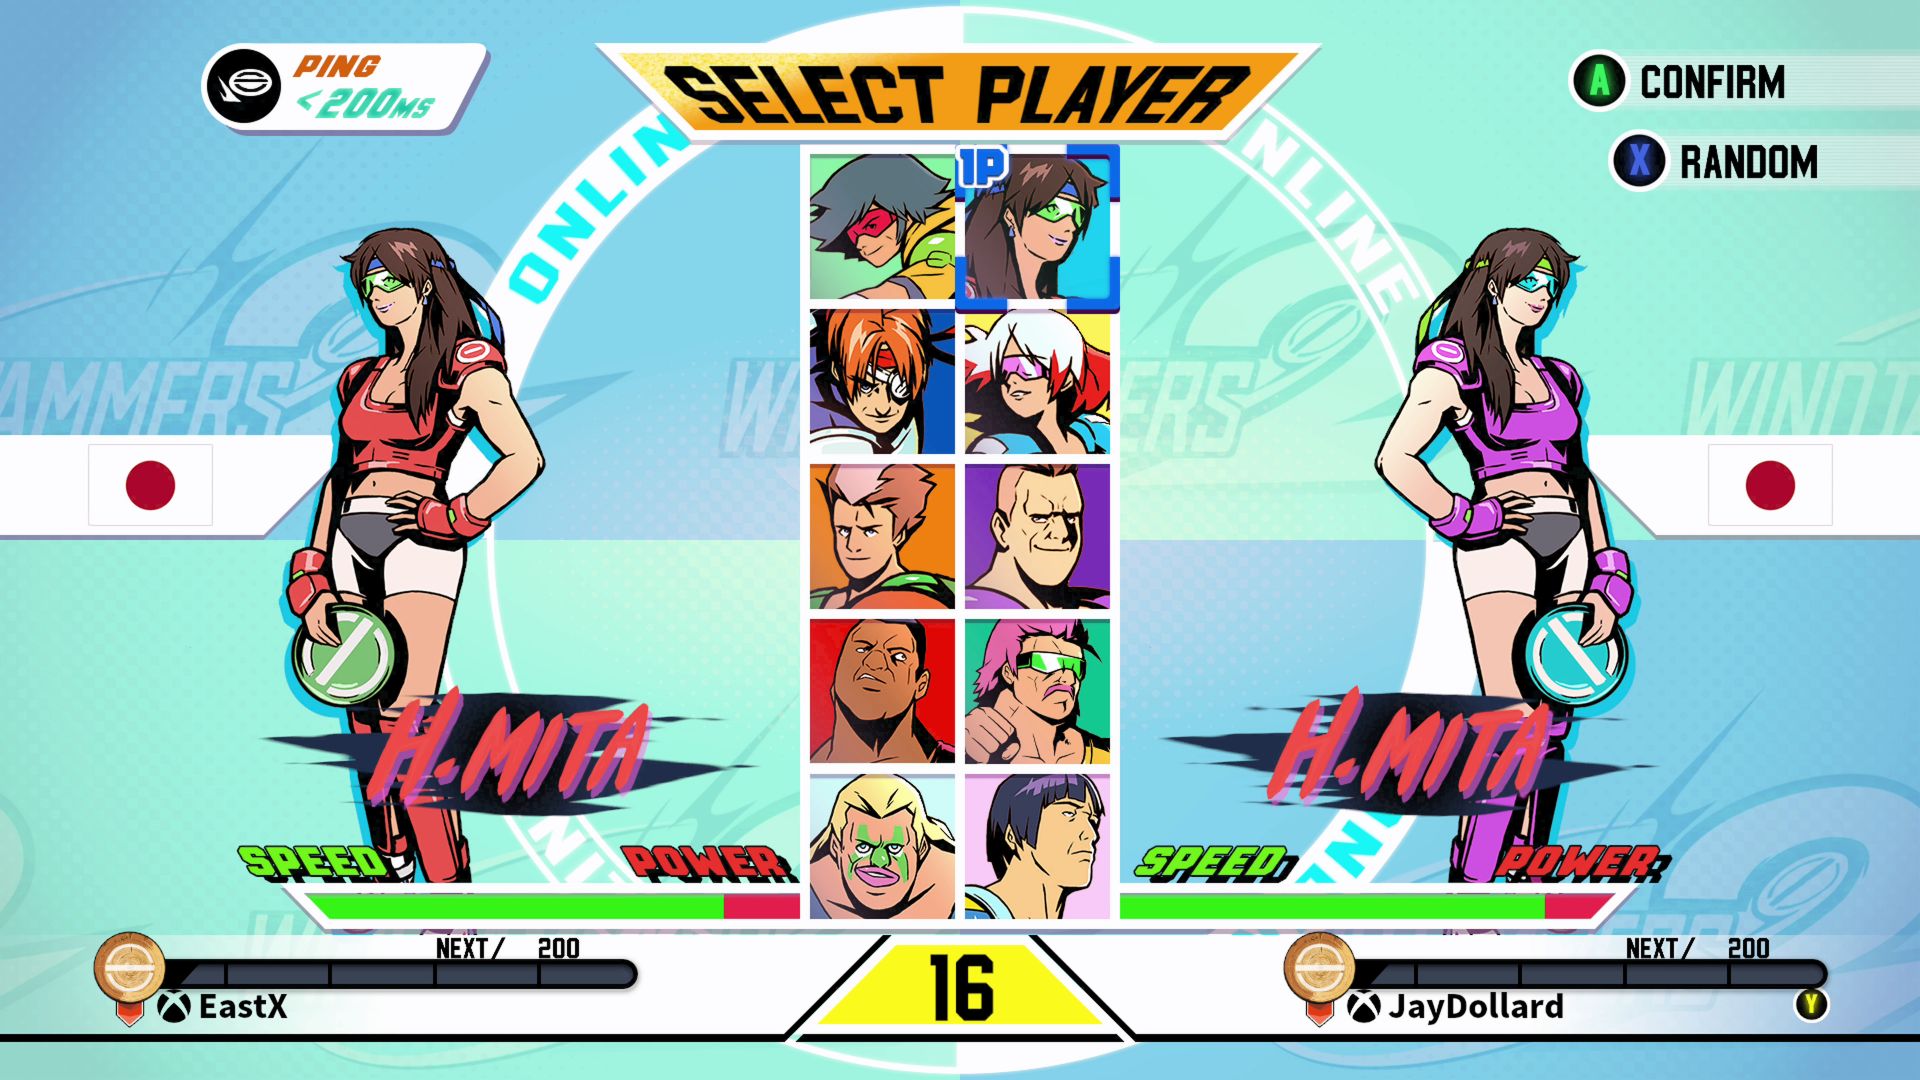 Windjammers 2 will let fly on Xbox One and Xbox Game Pass